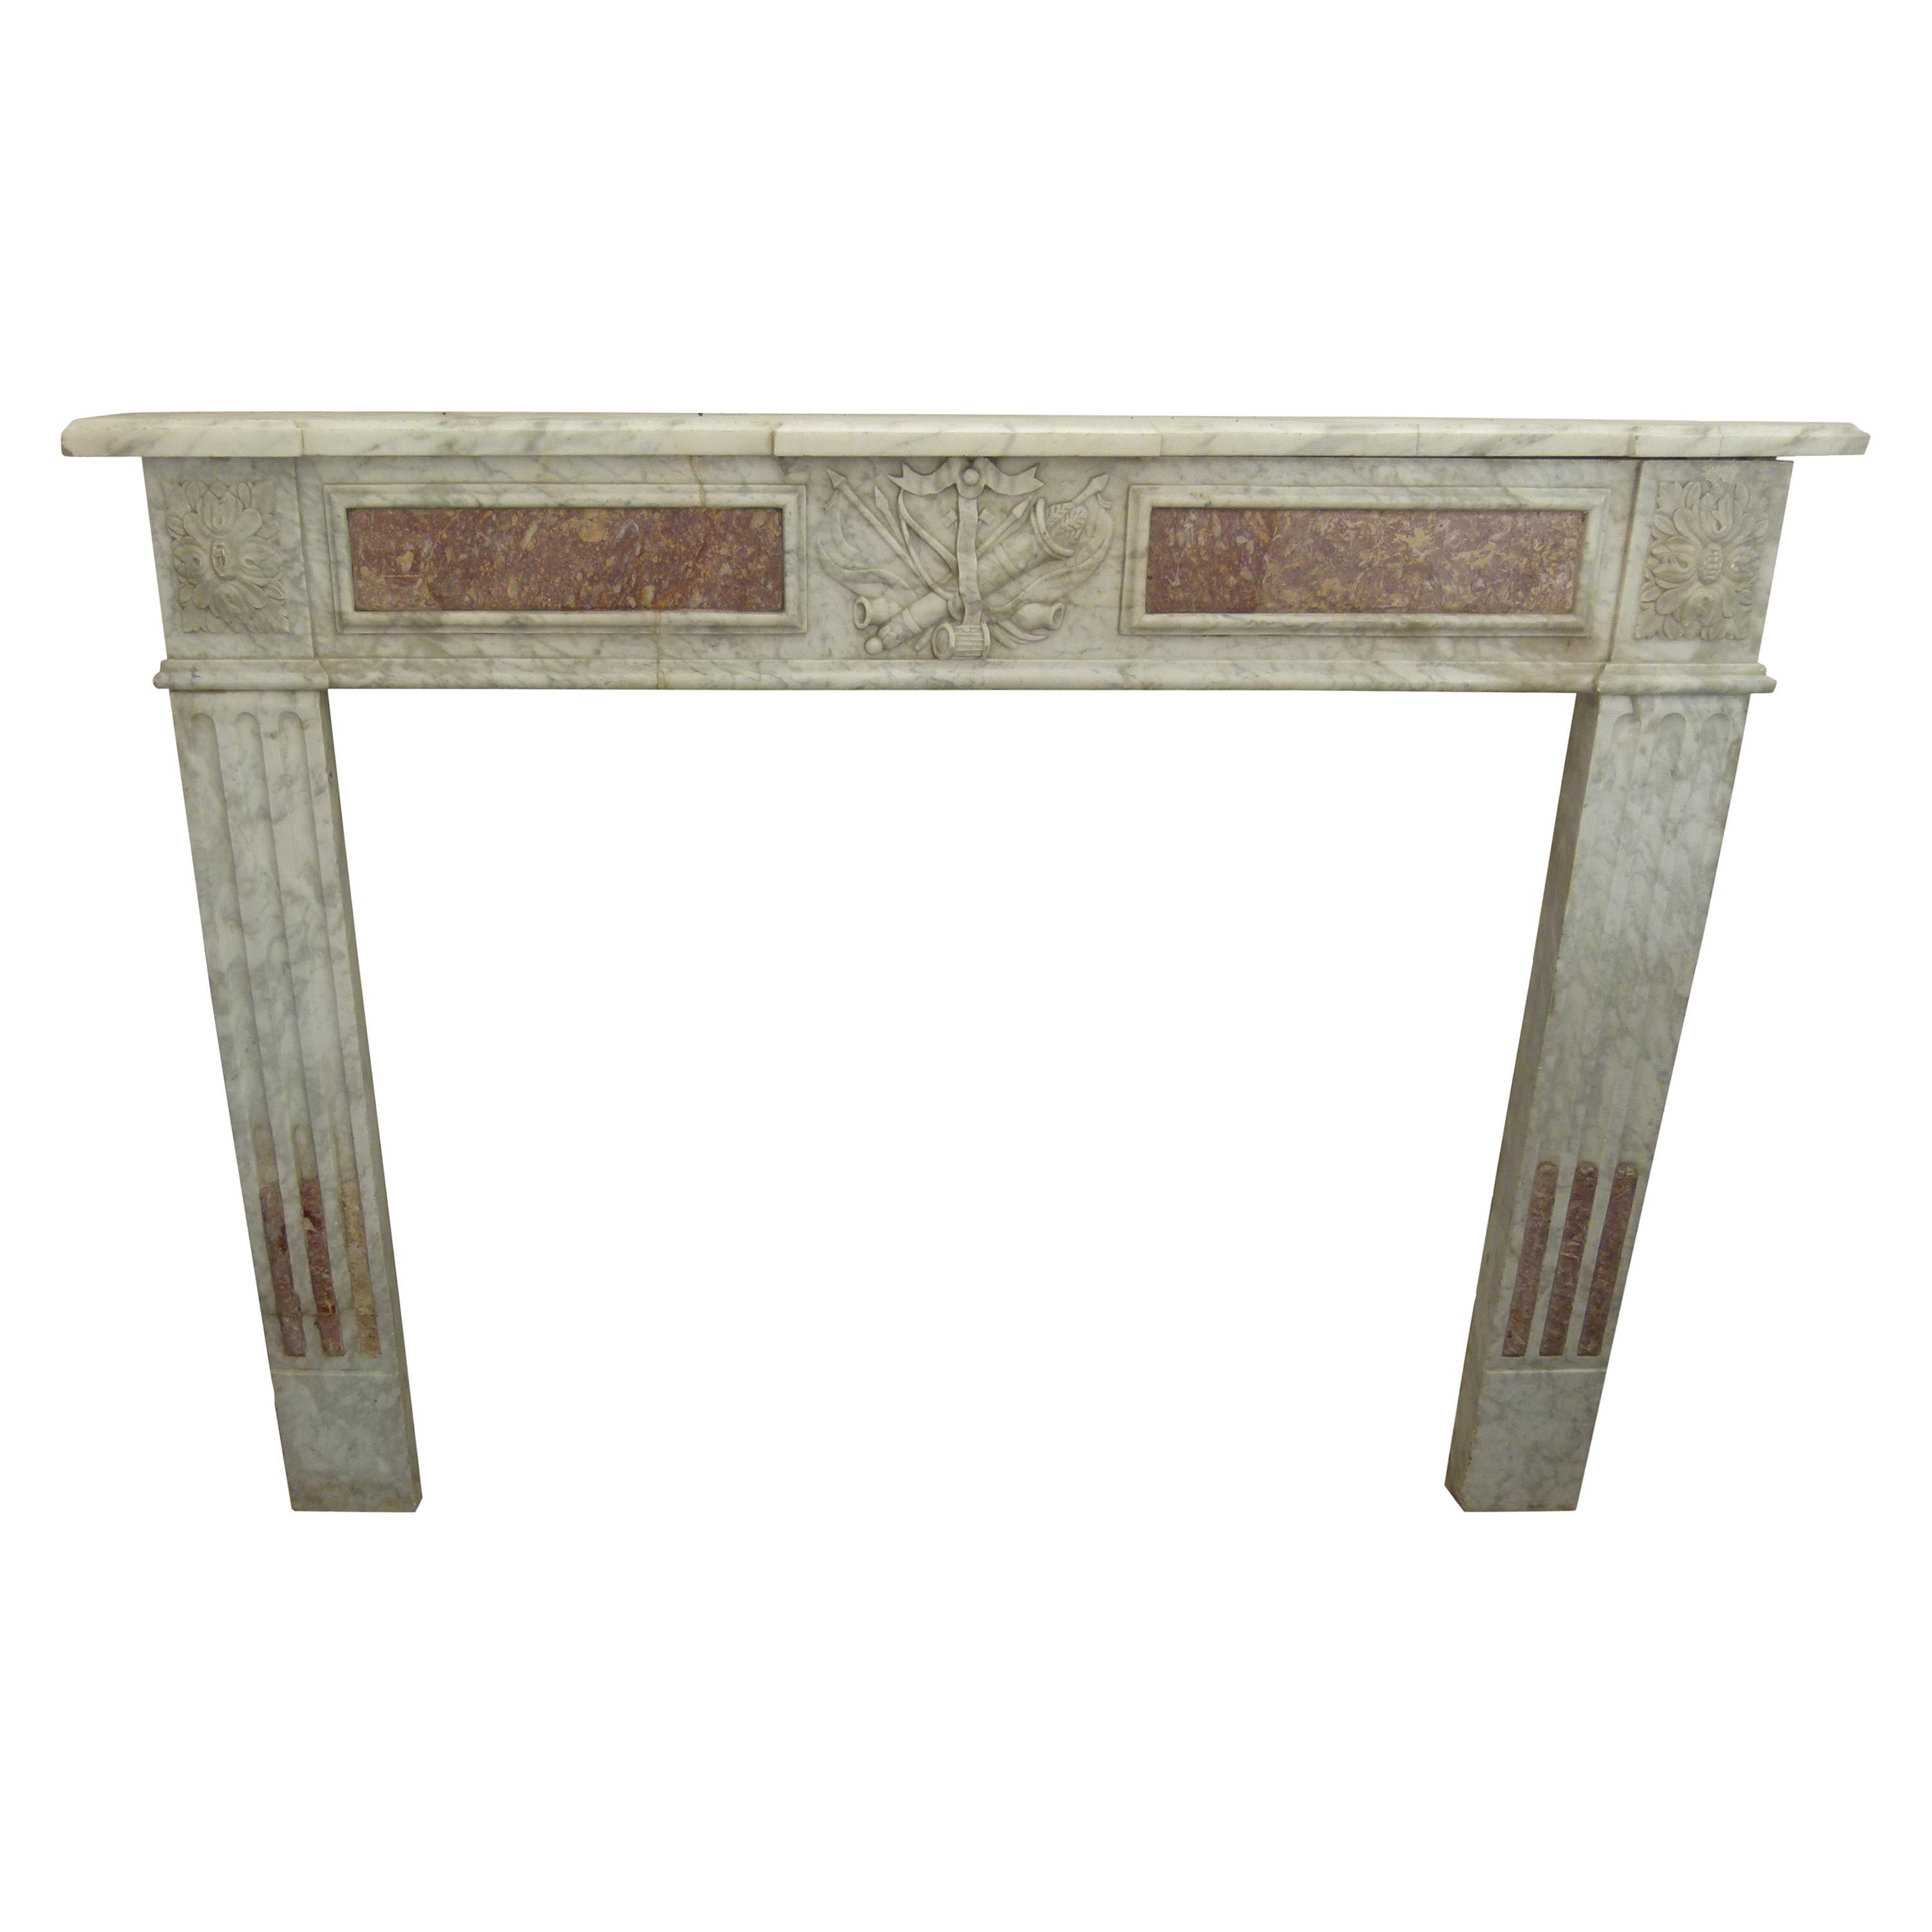 18th Century Louis XVI Style White and Red Marble Fireplace Mantel